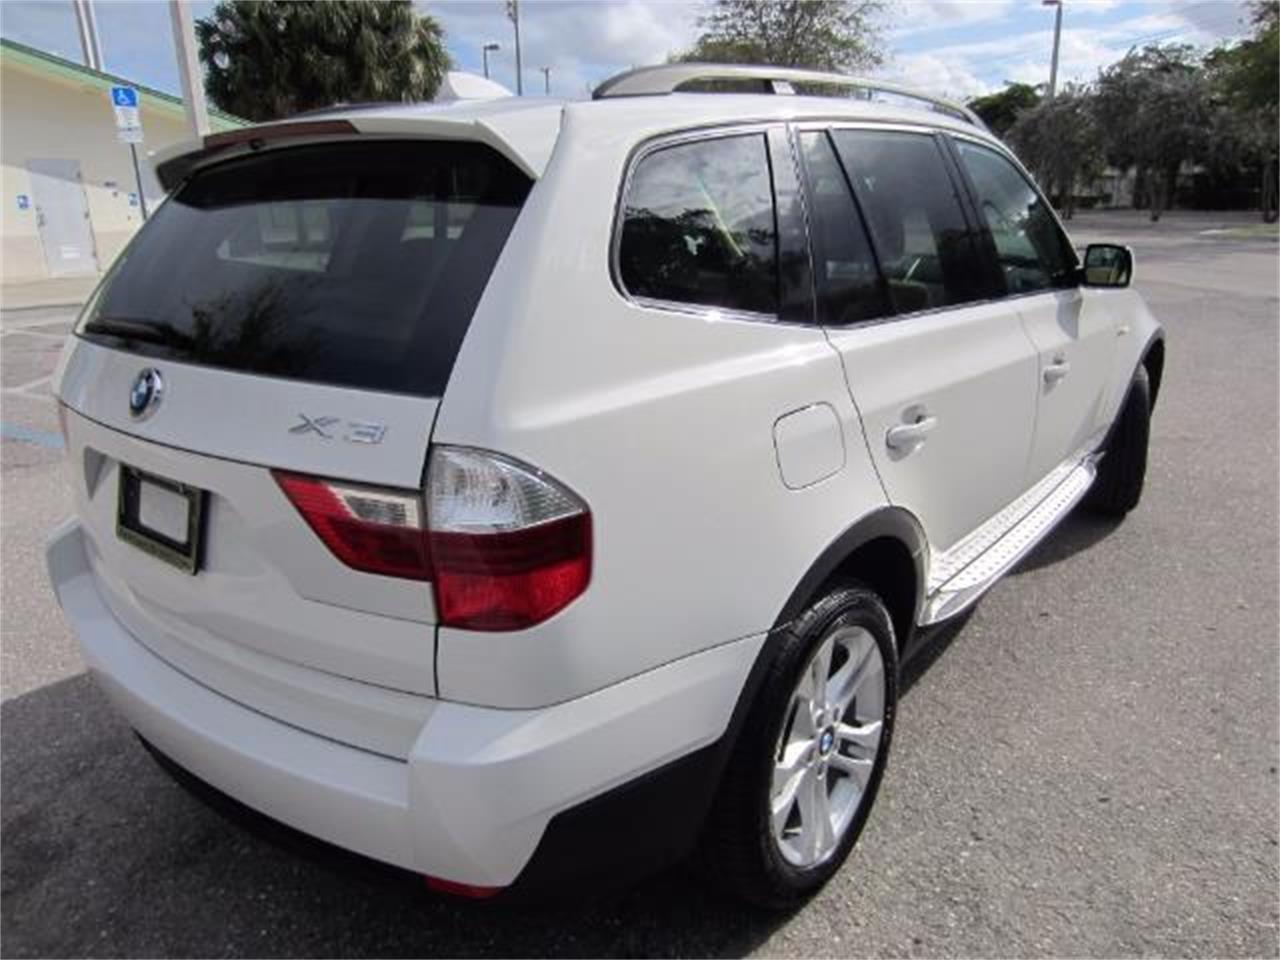 2008 Bmw X3 Shifting Problems AMC Sales Just In 2008